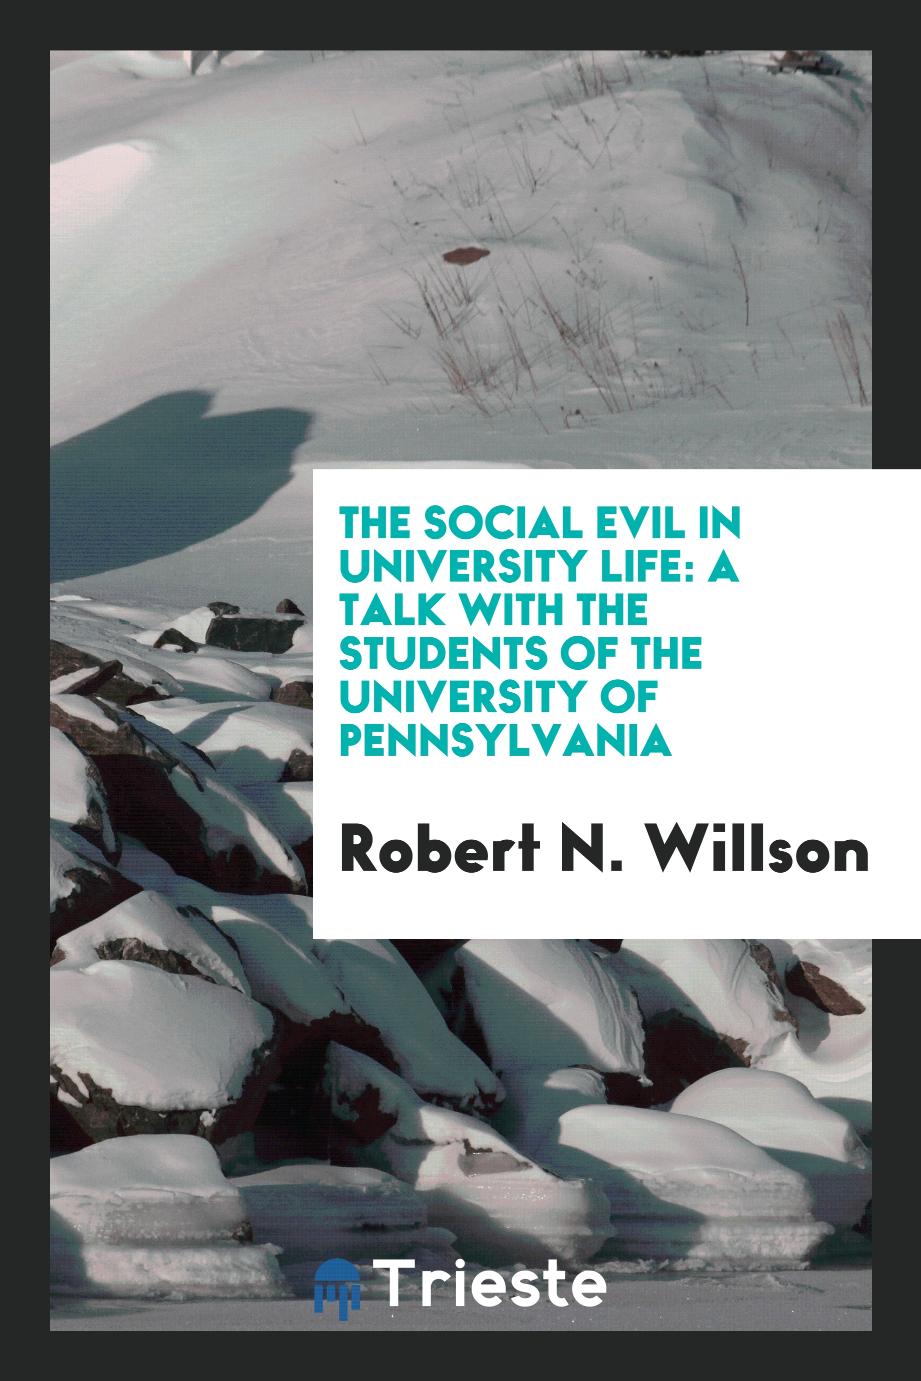 The Social Evil in University Life: A Talk with the Students of the University of Pennsylvania